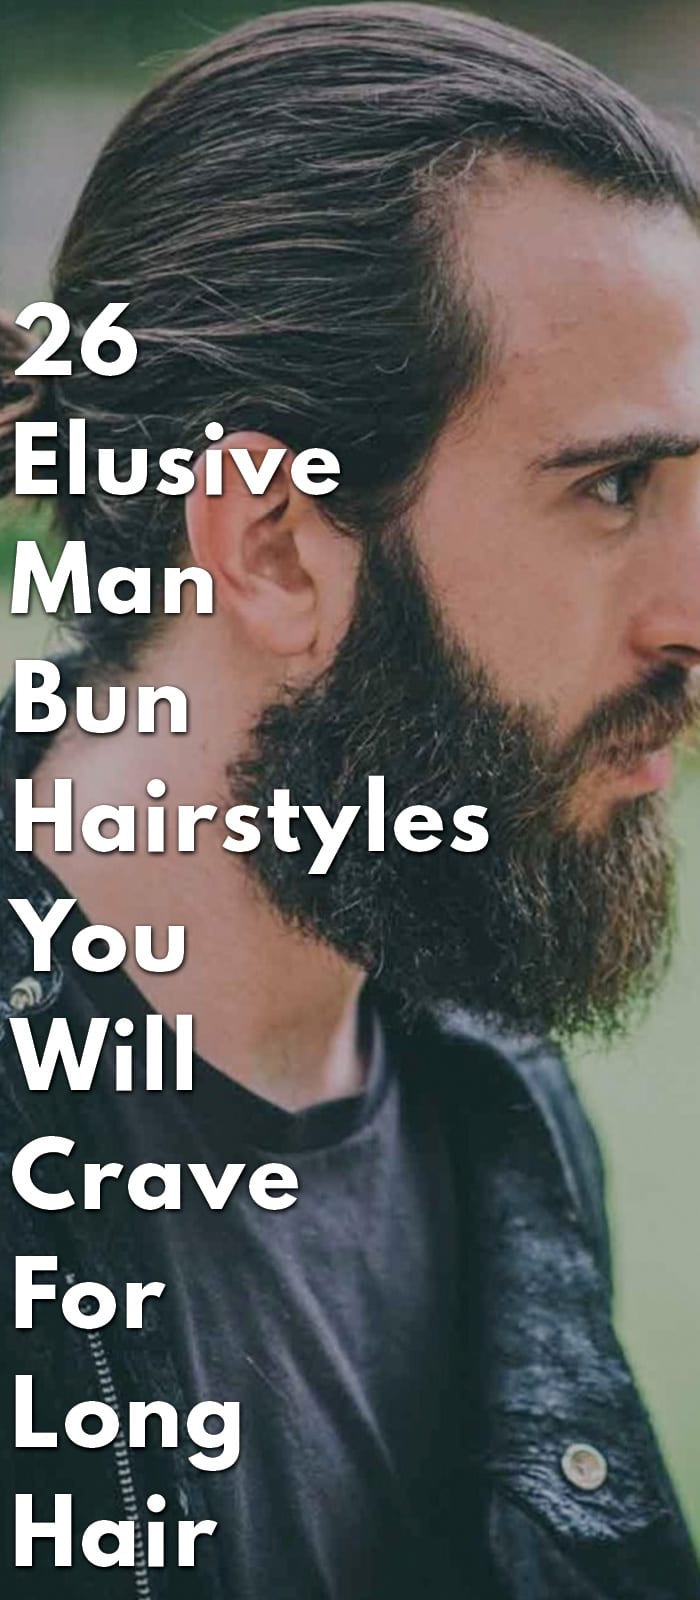 26-Elusive-Man-Bun-Hairstyles-You-Will-Crave-For-Long-Hair